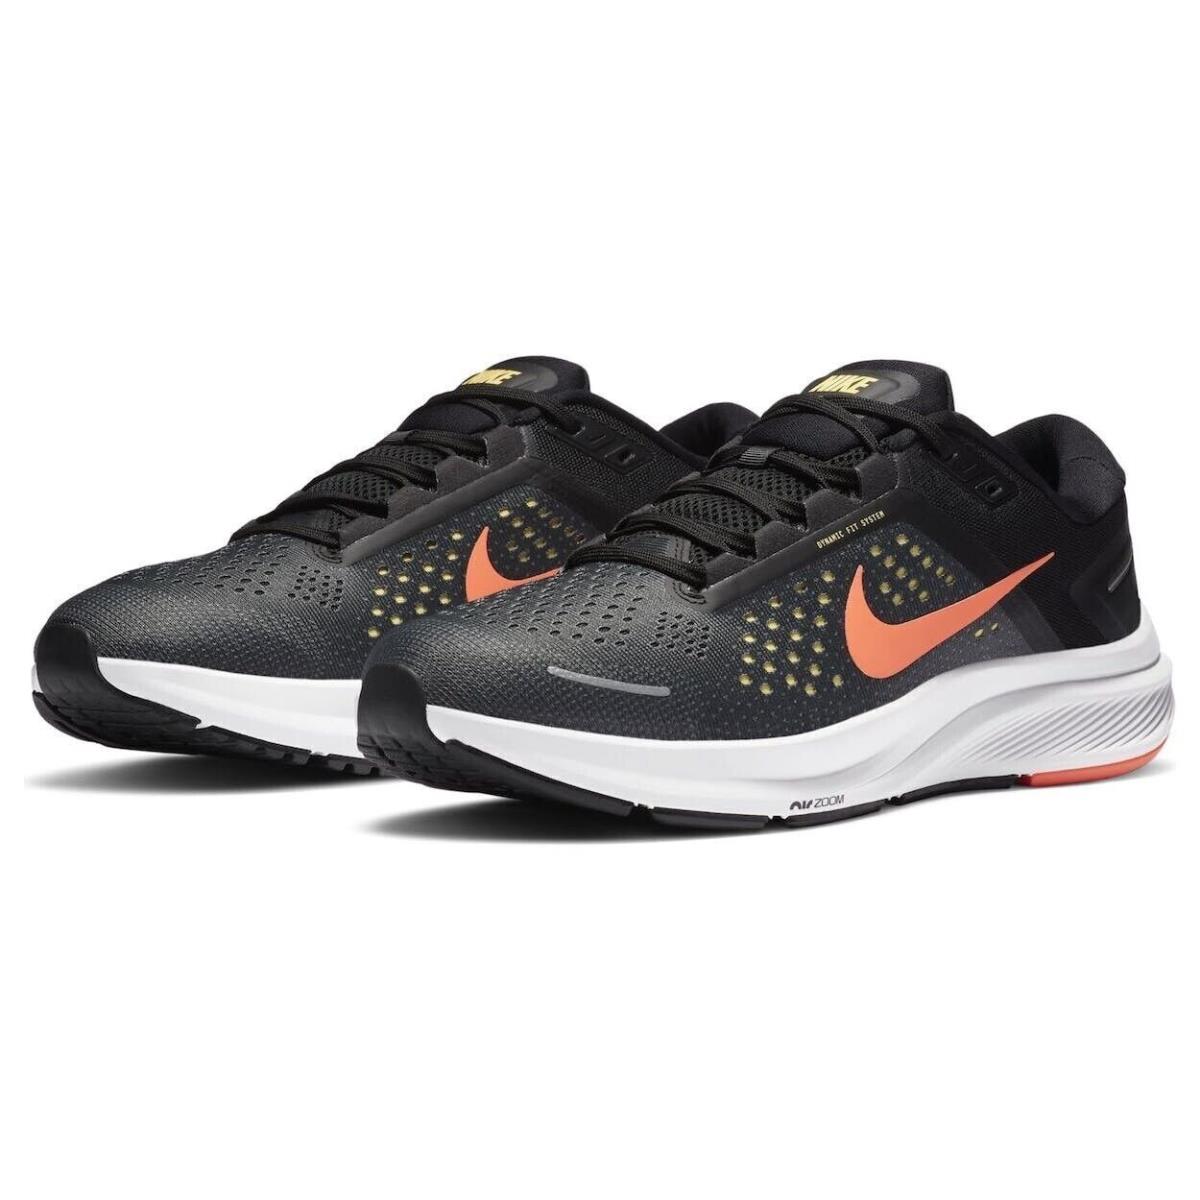 Nike shoes Air Zoom Structure - Bright Mango-Black 1